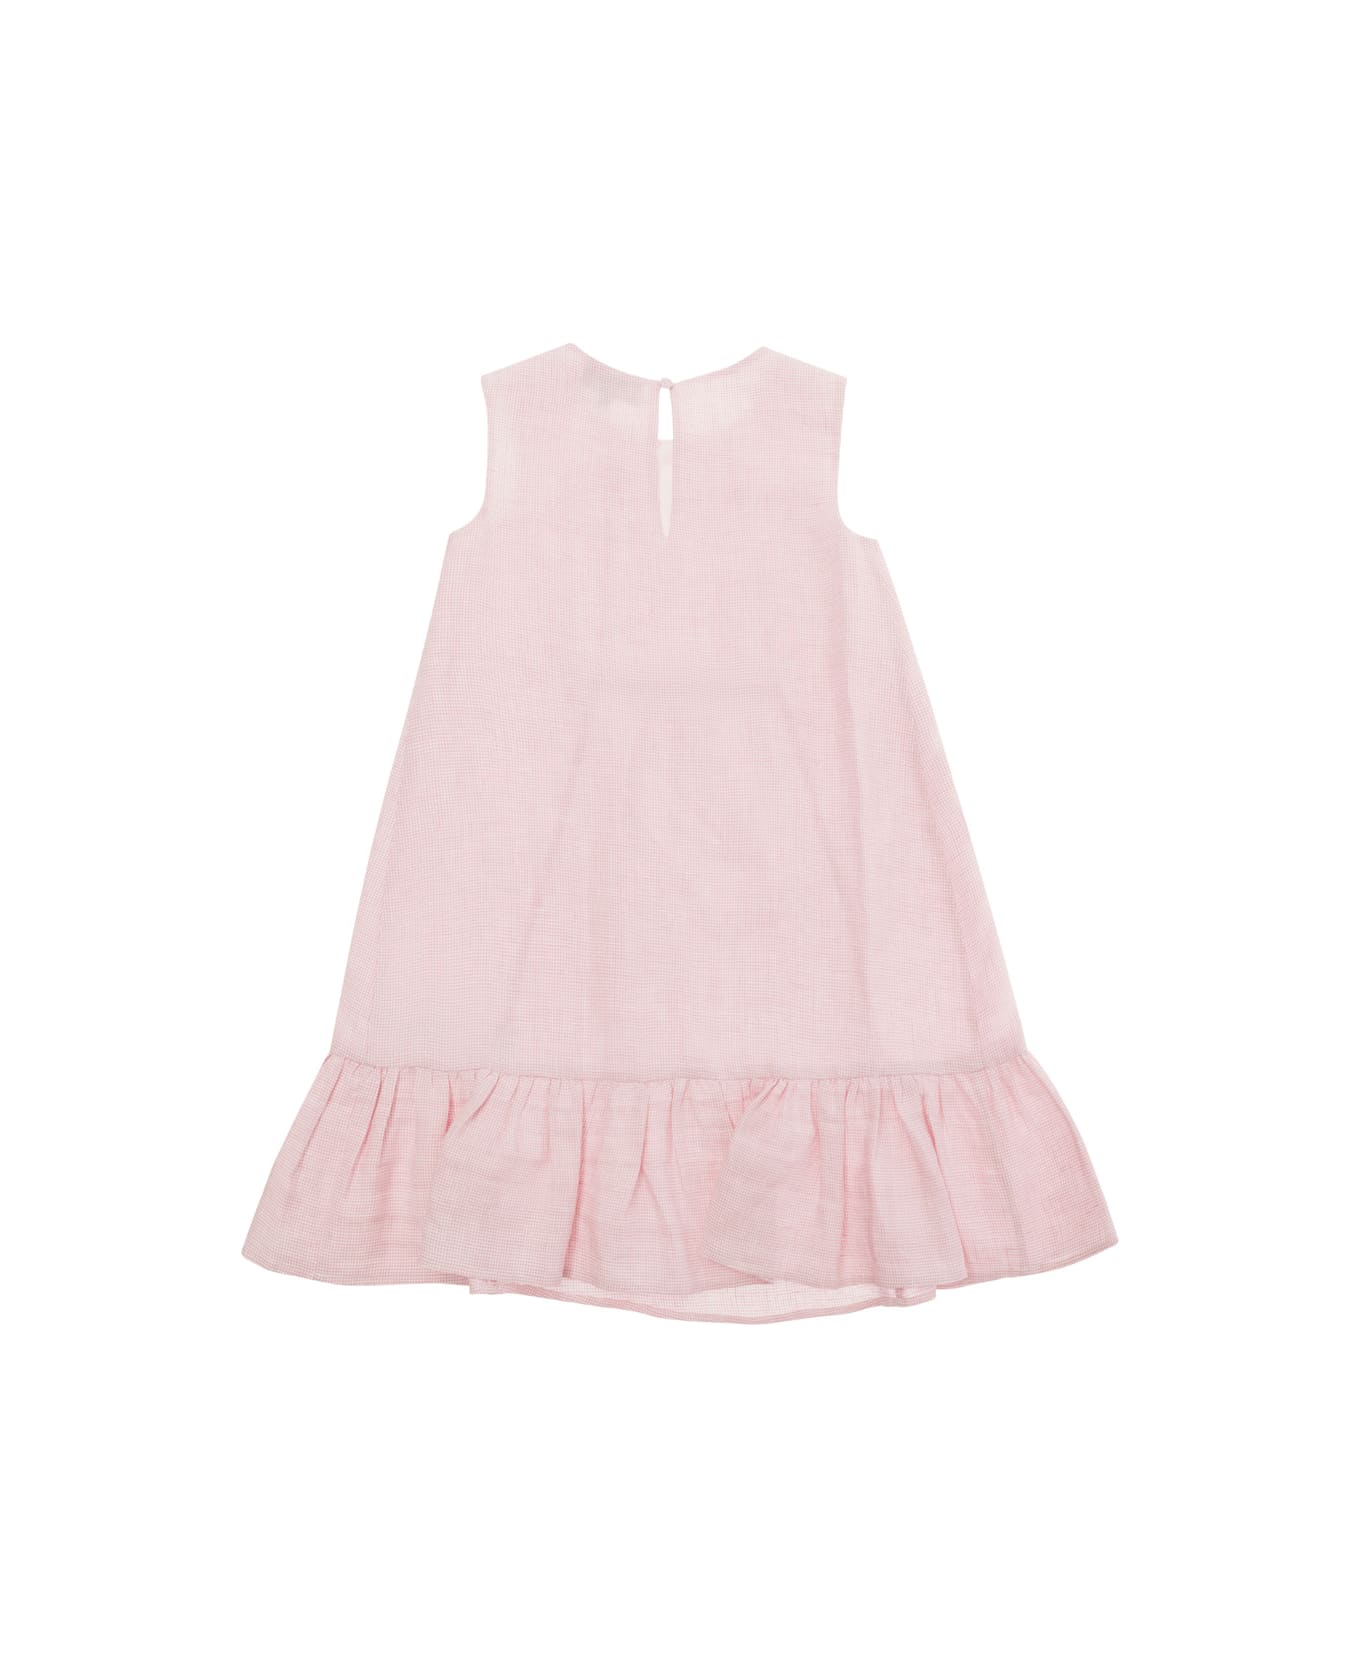 Emporio Armani Pink Dress With Volant Skirt In Linen Girl - Pink